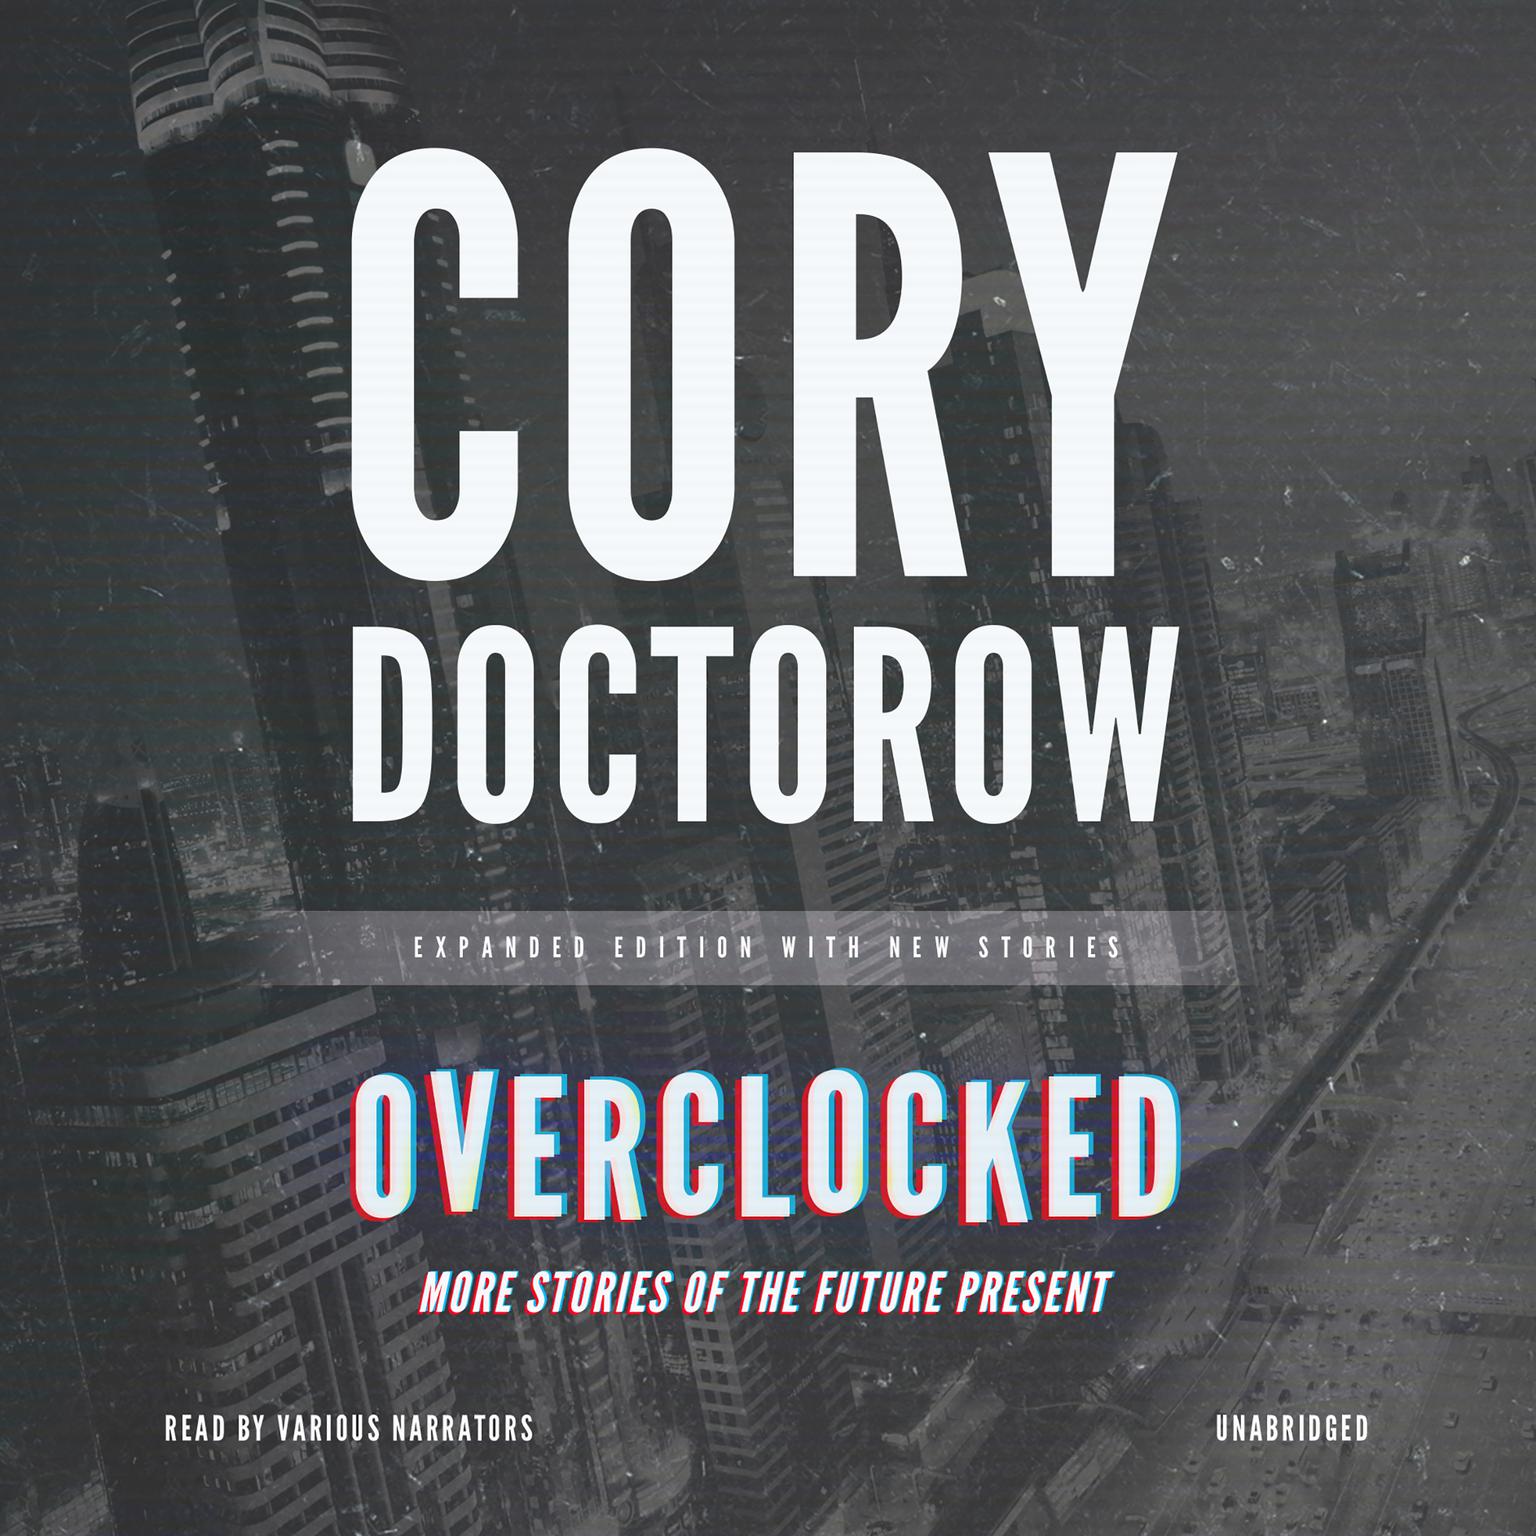 Overclocked: More Stories of the Future Present Audiobook, by Cory Doctorow